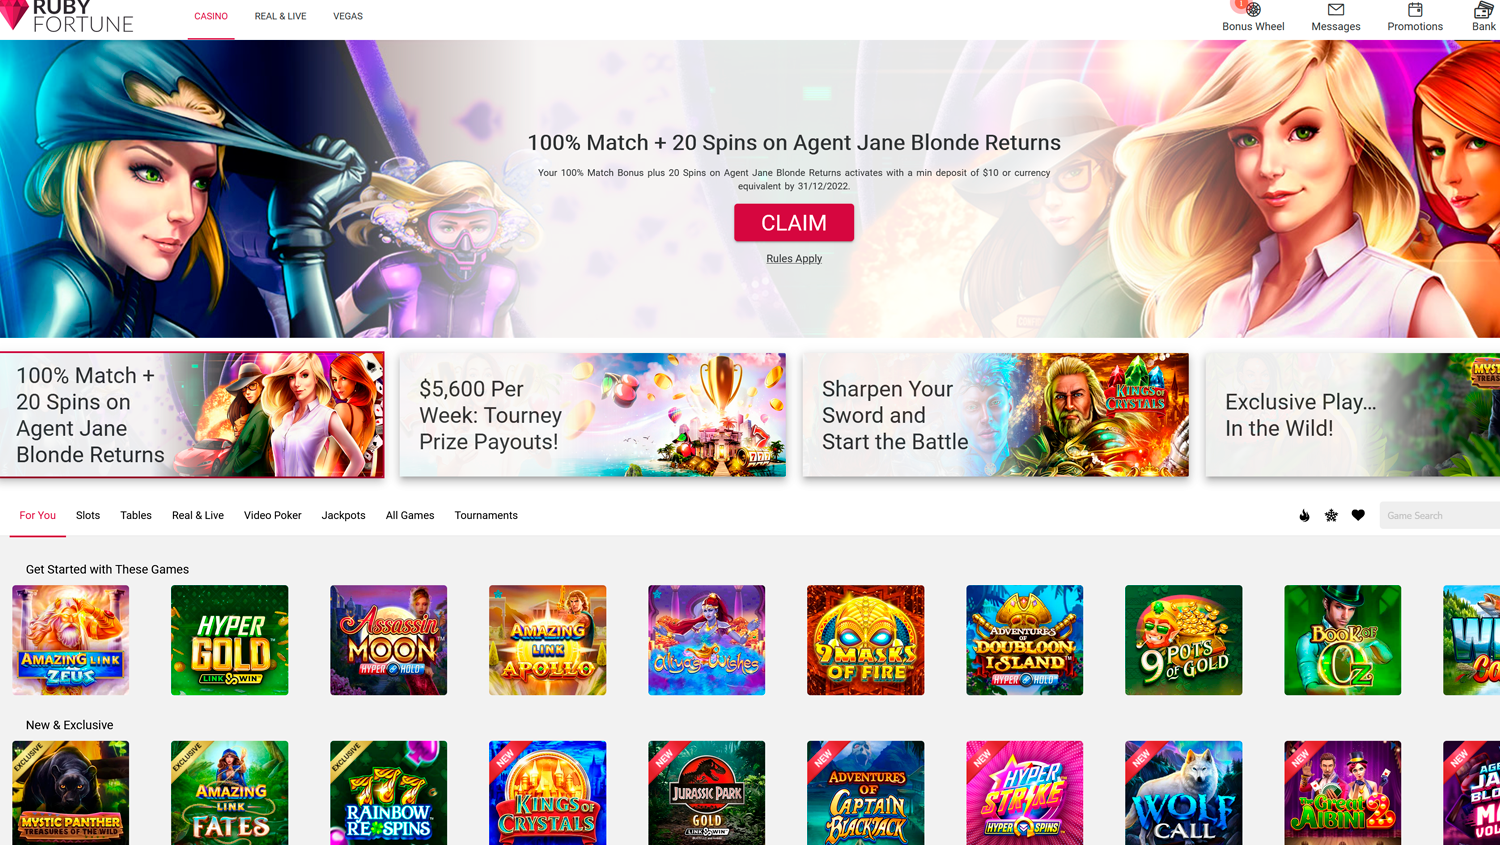 Lobby Page on Ruby Fortune Casino site